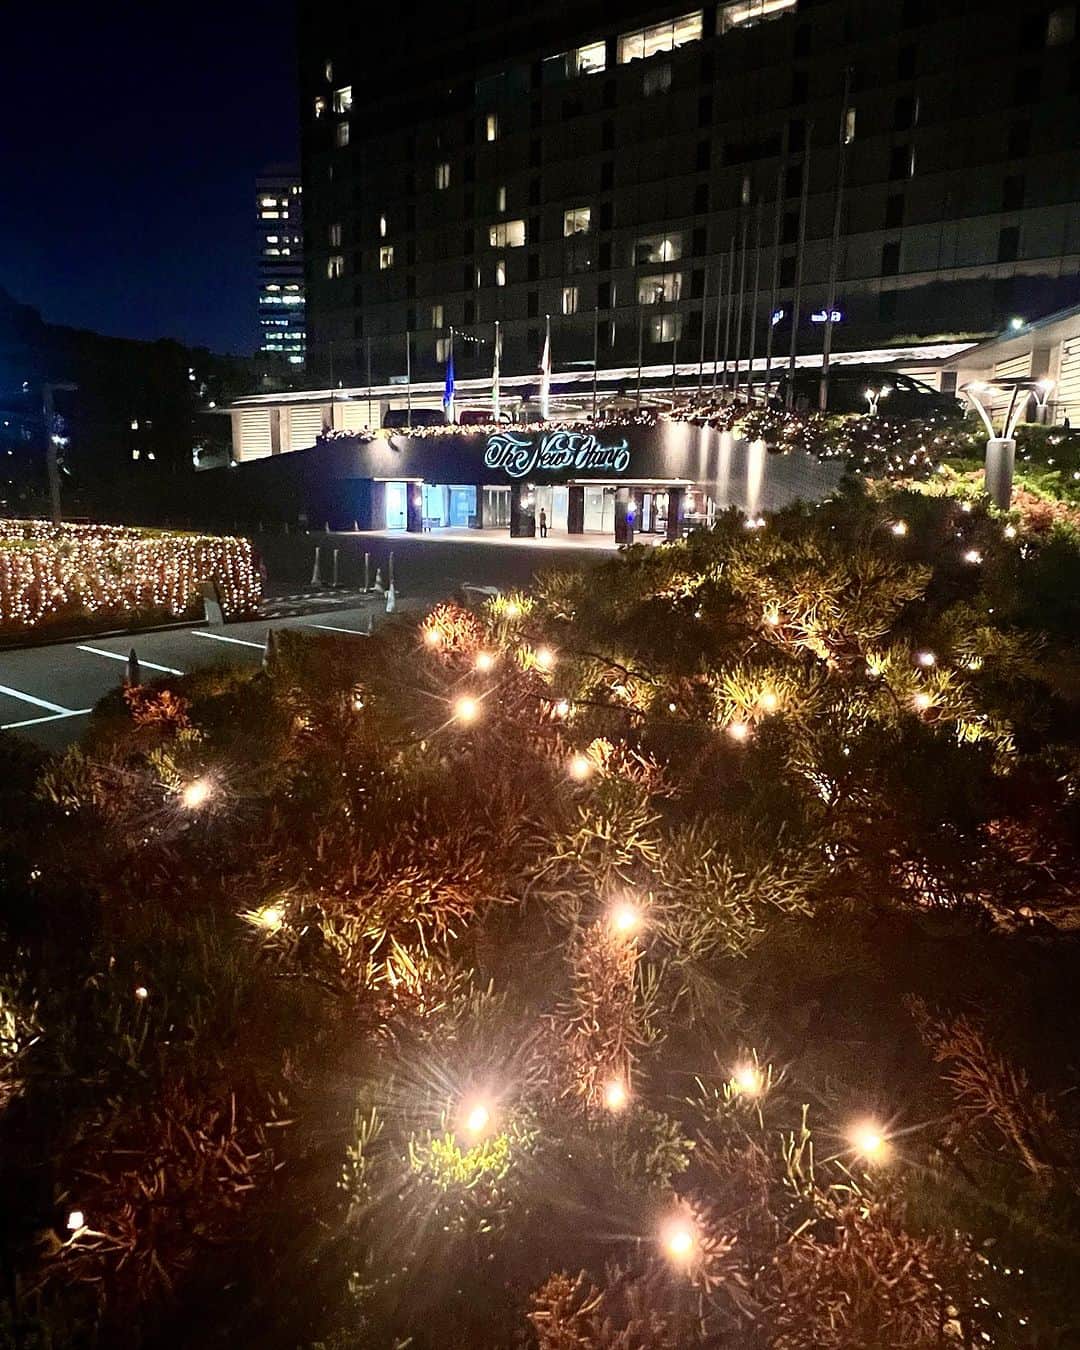 ホテル ニューオータニさんのインスタグラム写真 - (ホテル ニューオータニInstagram)「【Our Winter Illumination ✨ starts today.／本日よりスタート💫ウィンターイルミネーション✨】  The illumination which follows the hotel's perimeter has started today.  The total length of the illumination is nearly 10 km, and contains 130,000 lights that will envelop the hotel, making it one of the largest winter illuminations of any hotel in Tokyo.  As well, to get into the holiday spirit for the upcoming Christmas season, 30 Christmas trees of various sizes are scheduled to appear sequentially throughout the hotel’s grounds.  Come to the New Otani  and feel the true holiday spirit.  For more information, tap the "Christmas" link from the URL in the @hotelnewotanitokyo's profile👆.  本日よりホテル外周のイルミネーションがスタートしました。  総延長約10㎞、13万球のイルミネーションが包み込む、都内ホテル最大級のウィンターイルミネーションです。  これからのクリスマスシーズンに向けて、敷地内に大小30のクリスマスツリーも順次登場予定です。  ひと足先にホリデー気分を感じにいらしてください。  ◇詳細は @hotelnewotanitokyo プロフィールのURLより、「CHRISTMAS」リンクをタップ👆  🌟Winter Illumination Period  Hotel perimeter illumination: October 27, 2023 (Fri.) - February 29, 2024 (Thu.) <planned> Main tree: November 10, 2023 (Fri.) - December 25, 2023 (Mon.) <planned>. Time 16:00 - 26:00 *Vary according to location This holiday cheer is presented gratis!   🌟ウィンターイルミネーション 期間 ホテル外周イルミネーション：2023年10月27日（金）～ 2024年2月29日（木）＜予定＞ メインツリー：2023年11月10日（金）～12月25日（月）＜予定＞  時間 16:00～26:00 * 場所により異なります 料金 鑑賞無料 場所 ホテル敷地内  #イルミネーション #クリスマスツリー #クリスマス #クリスマスイブ #クリスマスケーキ #クリスマスディナー #クリスマスパーティ #christmas #xmas #ホテル #東京ホテル #ホテルステイ  #ホテルニューオータニ #ニューオータニ #hotelnewotani #newotani  #tokyo #japan #tokyotrip  #tokyotravel #tokyohotel #hotelstay #virtualtour #forbestravelguide #futuretravelguide #thepreferredlife」10月27日 20時56分 - hotelnewotanitokyo